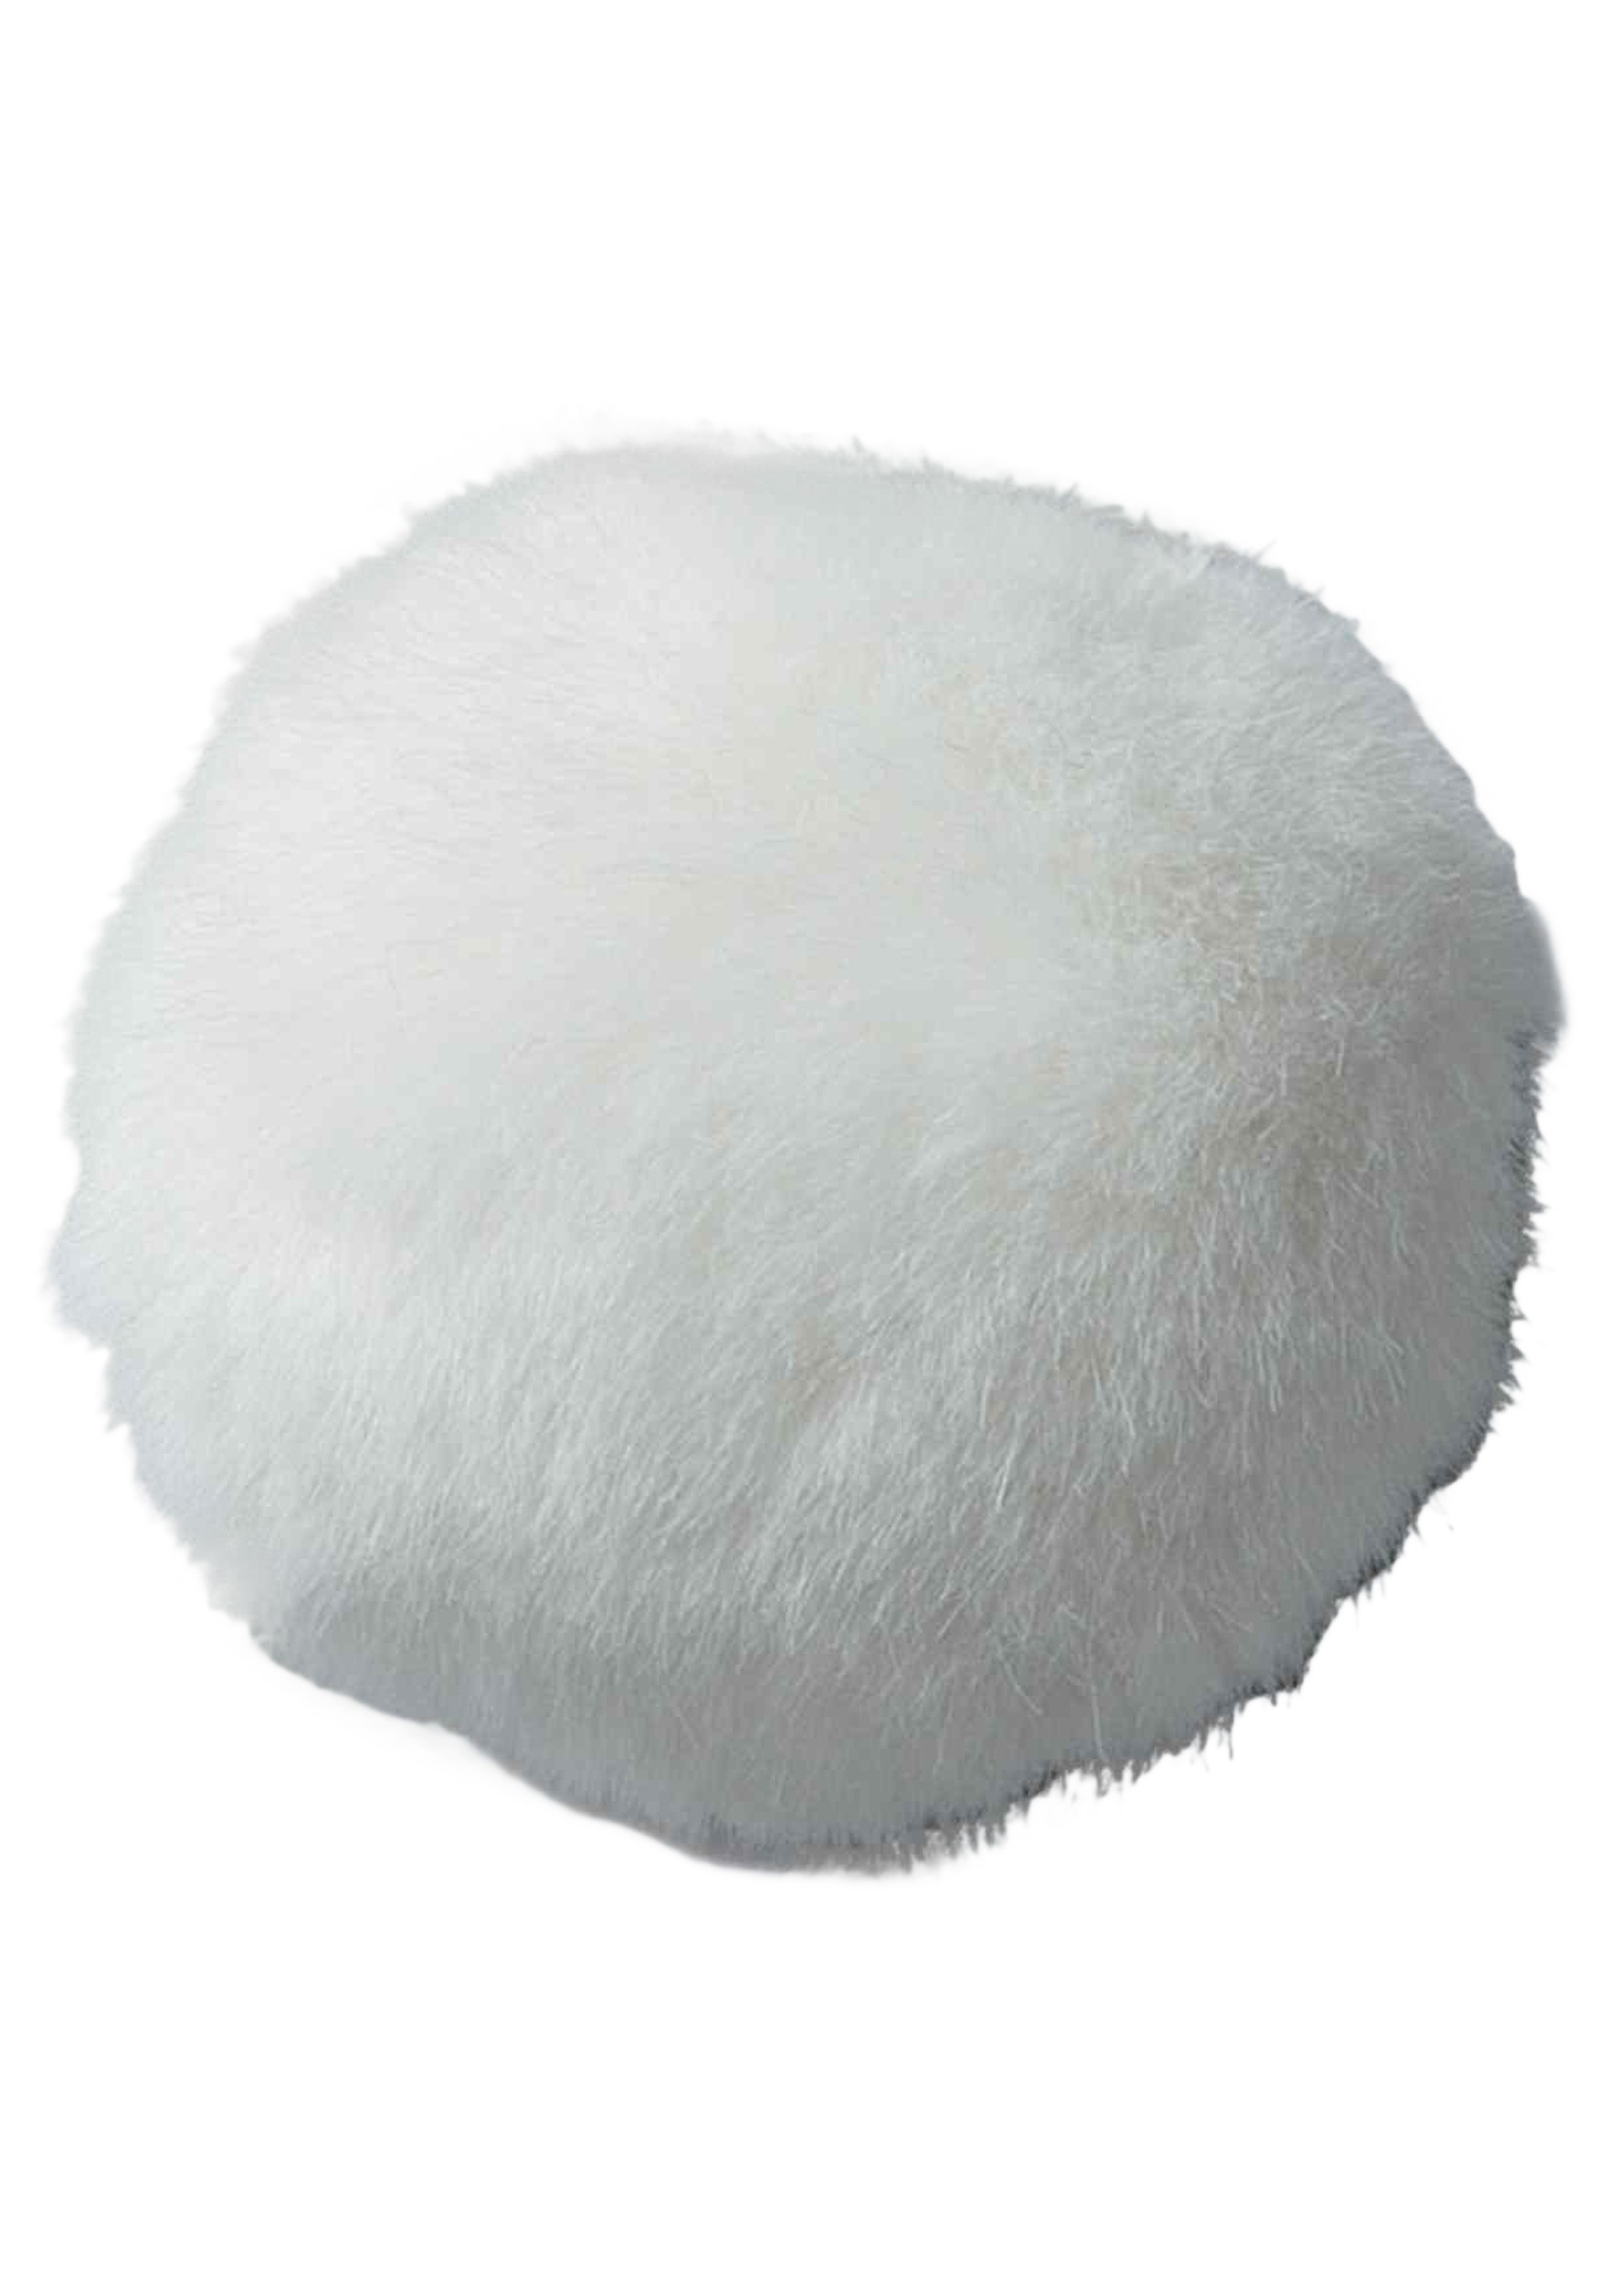 Bunny Tail Png & Free Bunny Tail.png Transparent Images #15195.